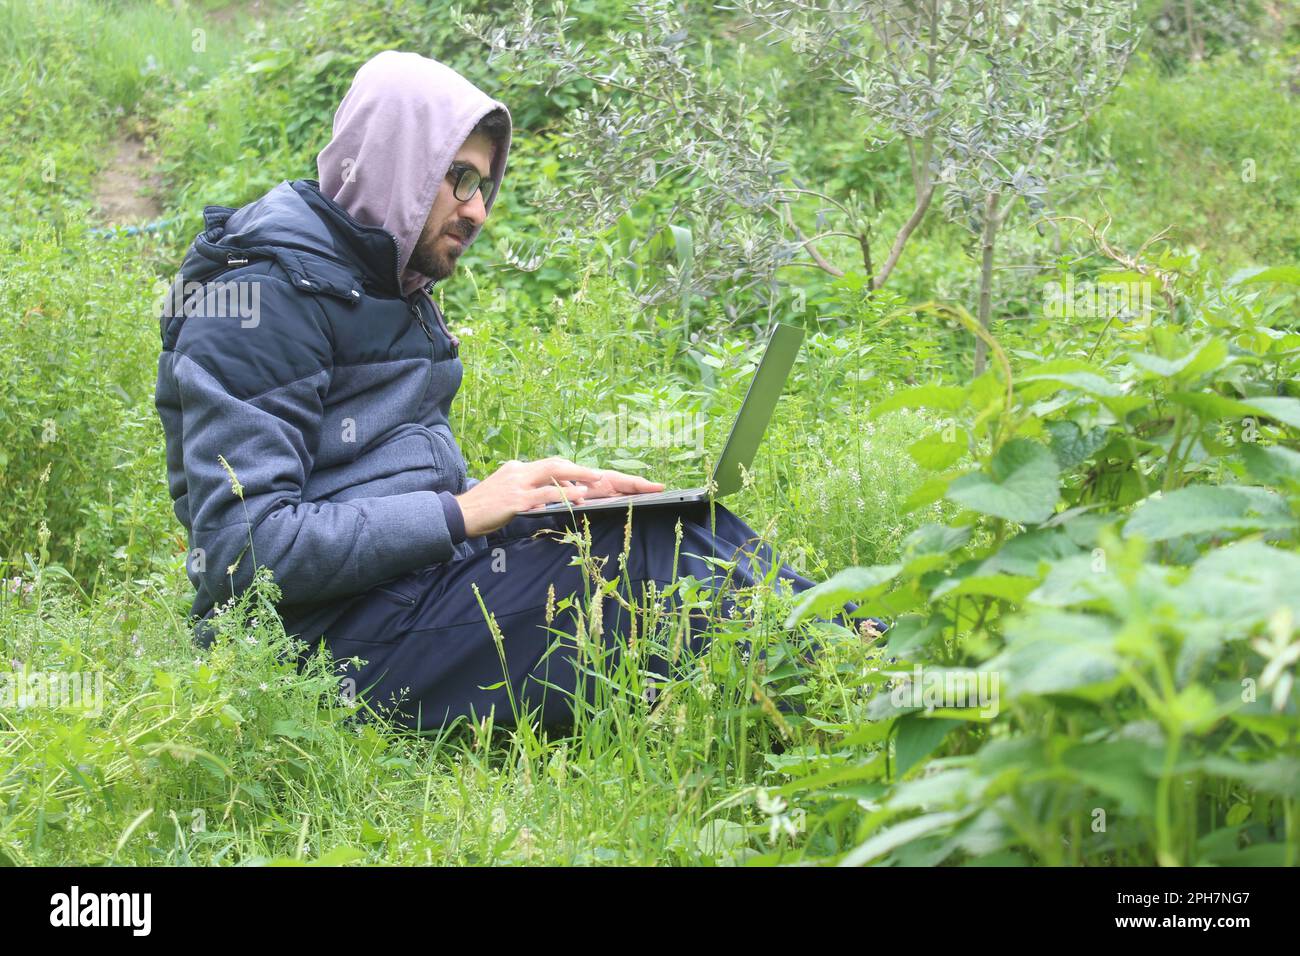 A man working with laptop in nature. Work outdoor concept idea. Stock Photo